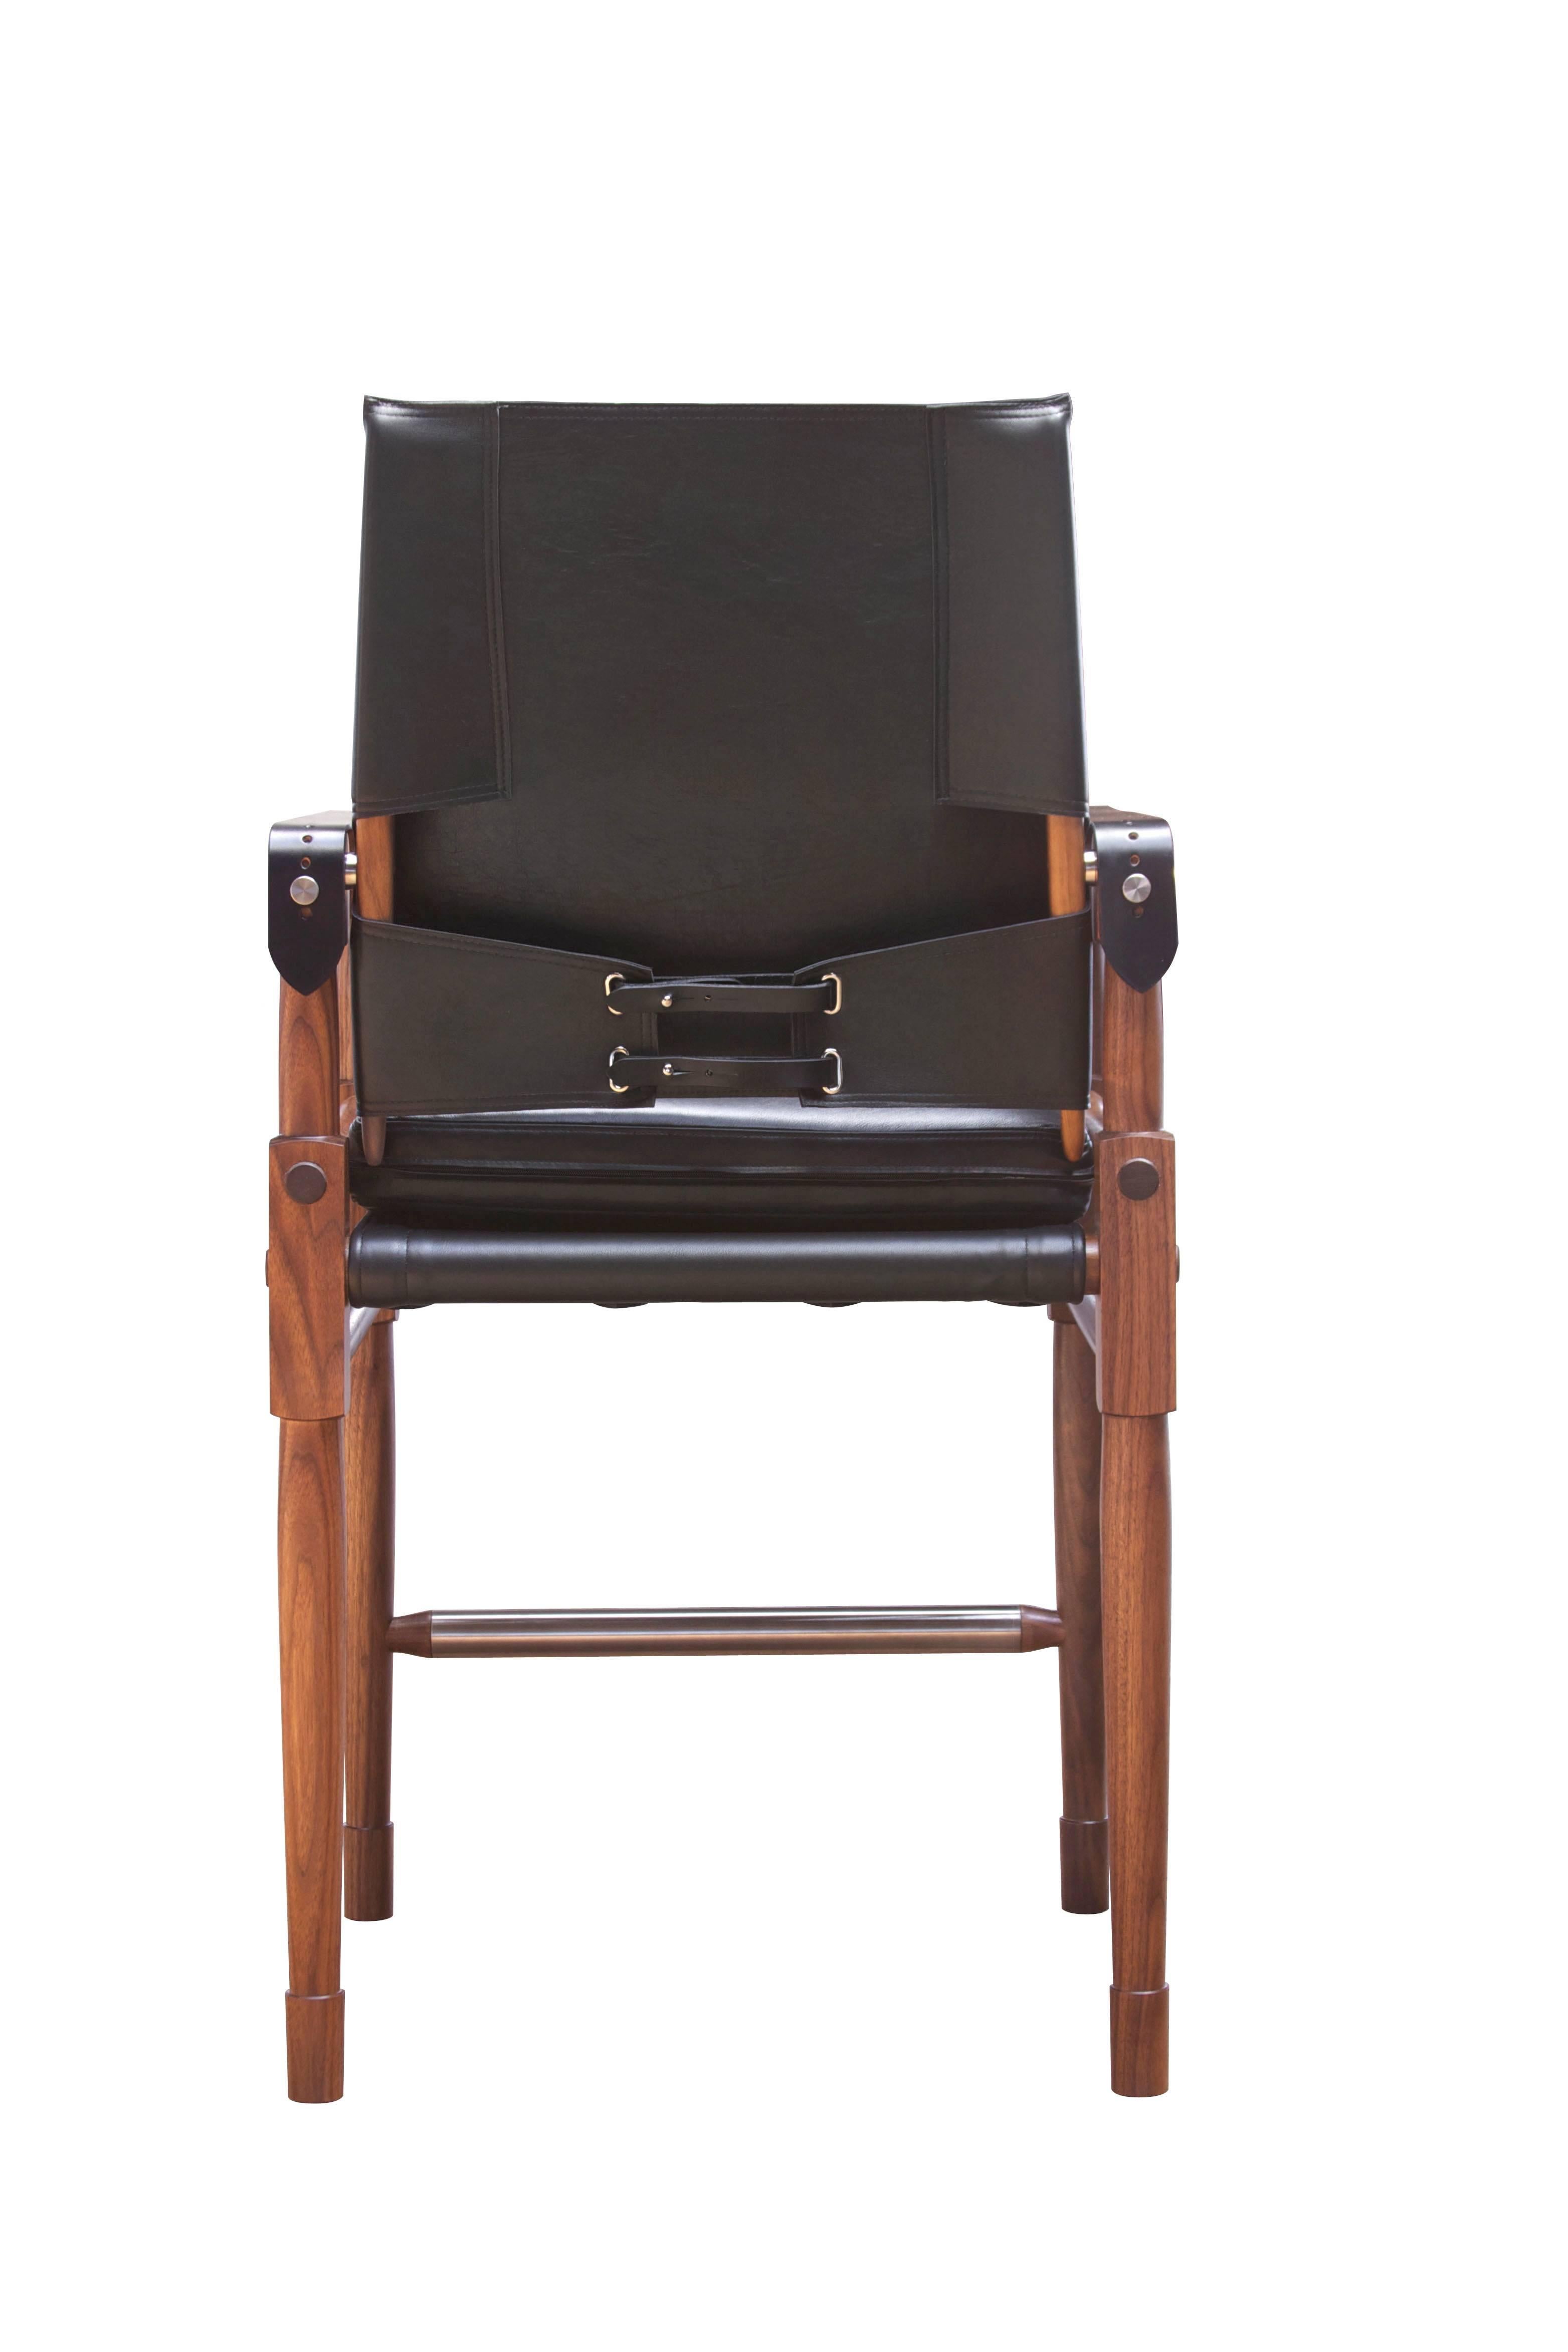 Modern Black Leather Chatwin Counter Chair - handcrafted by Richard Wrightman Design